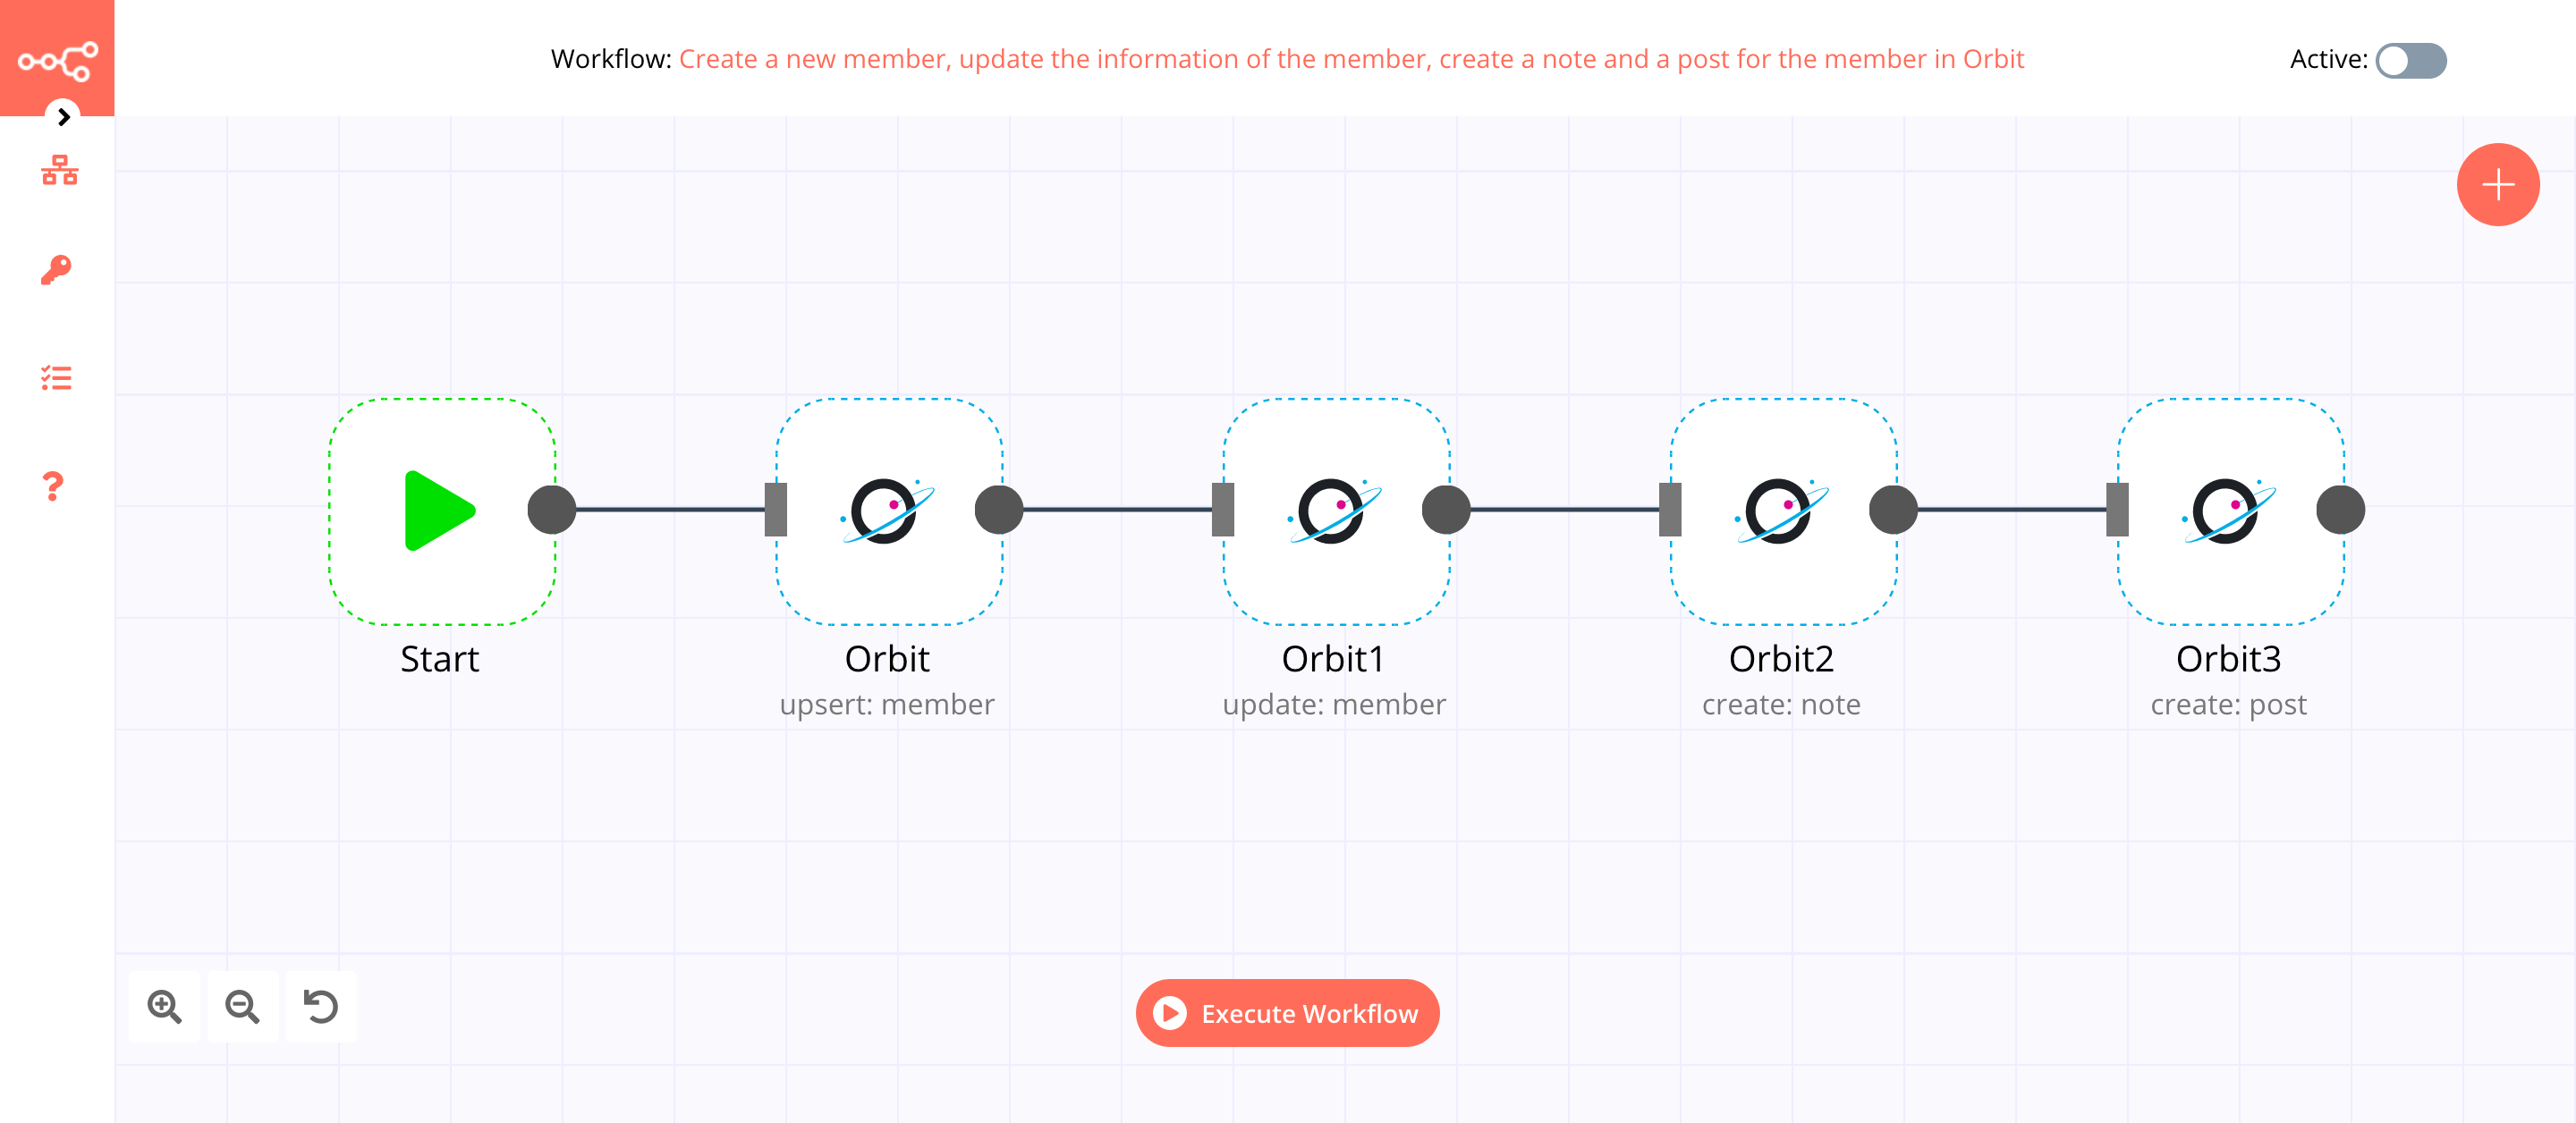 A workflow with the Orbit node